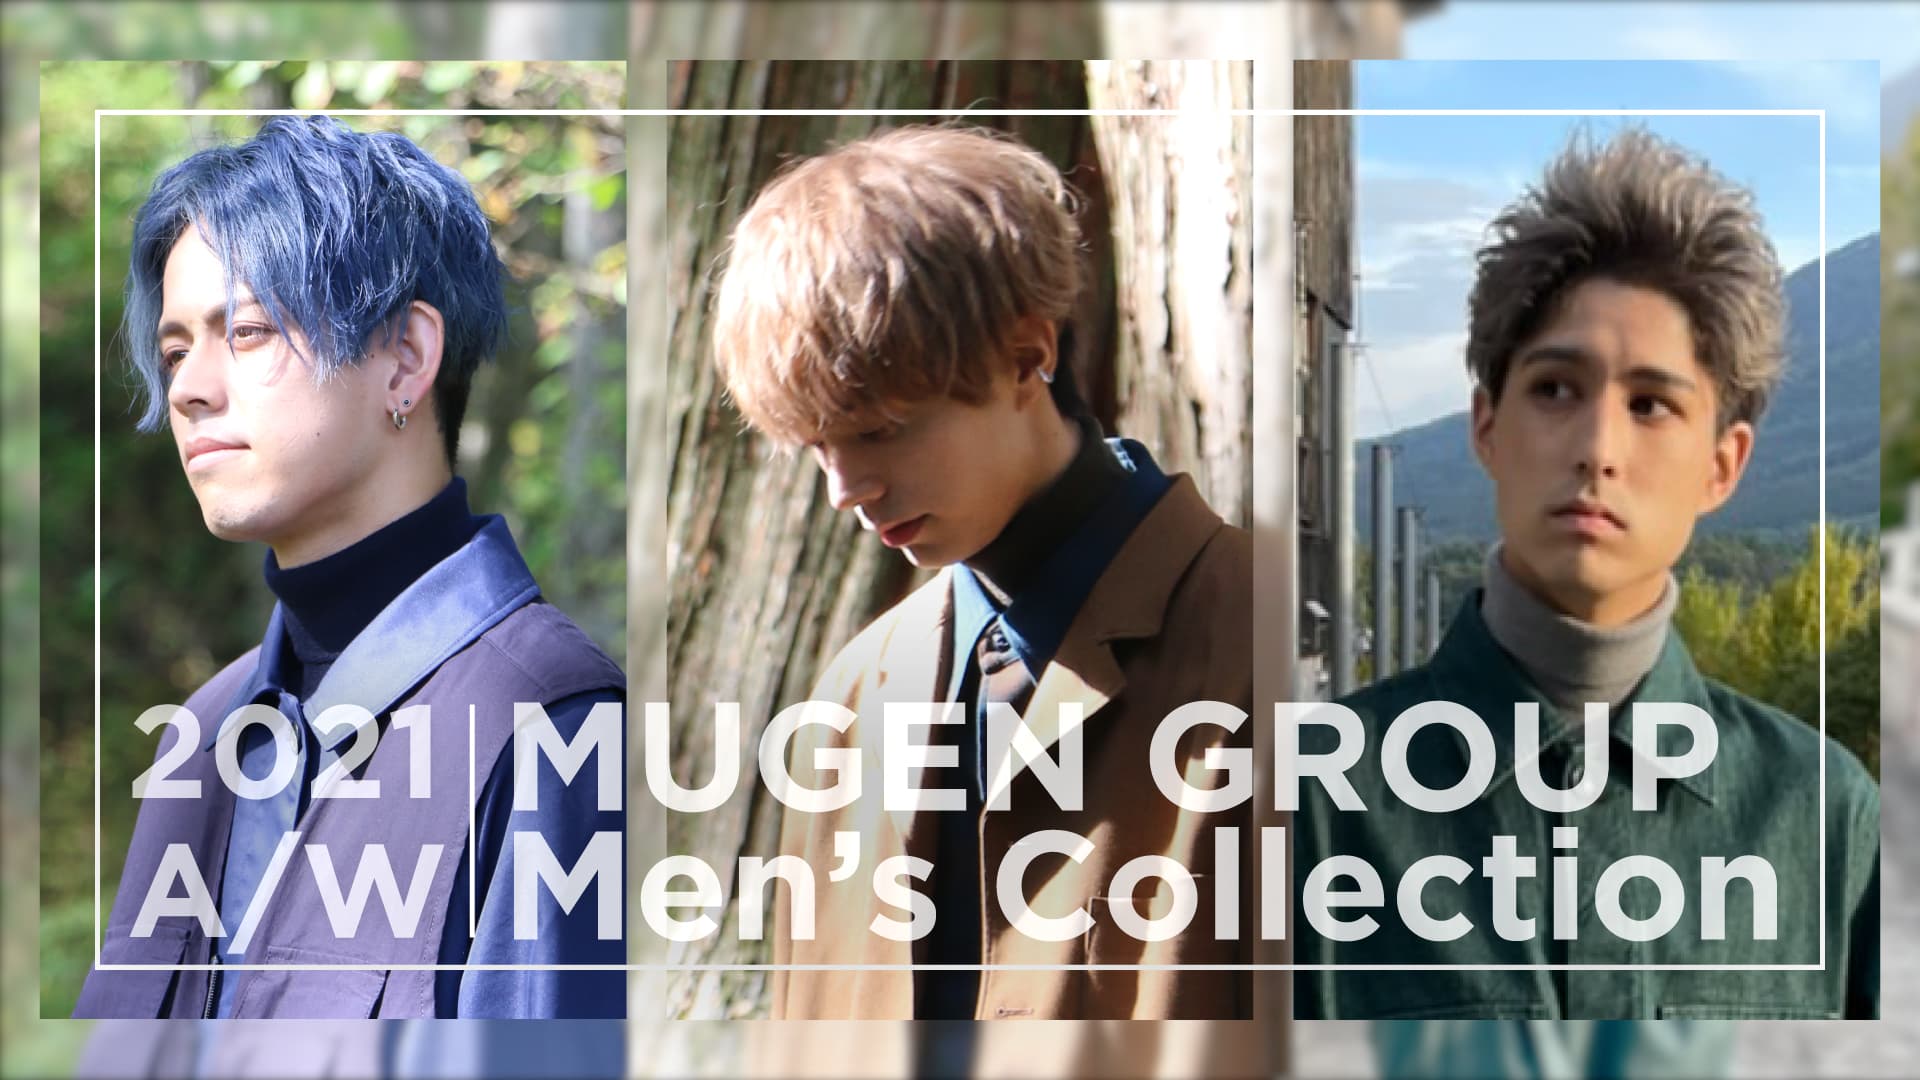 MUGEN GROUP A/W Men's COLLECTION